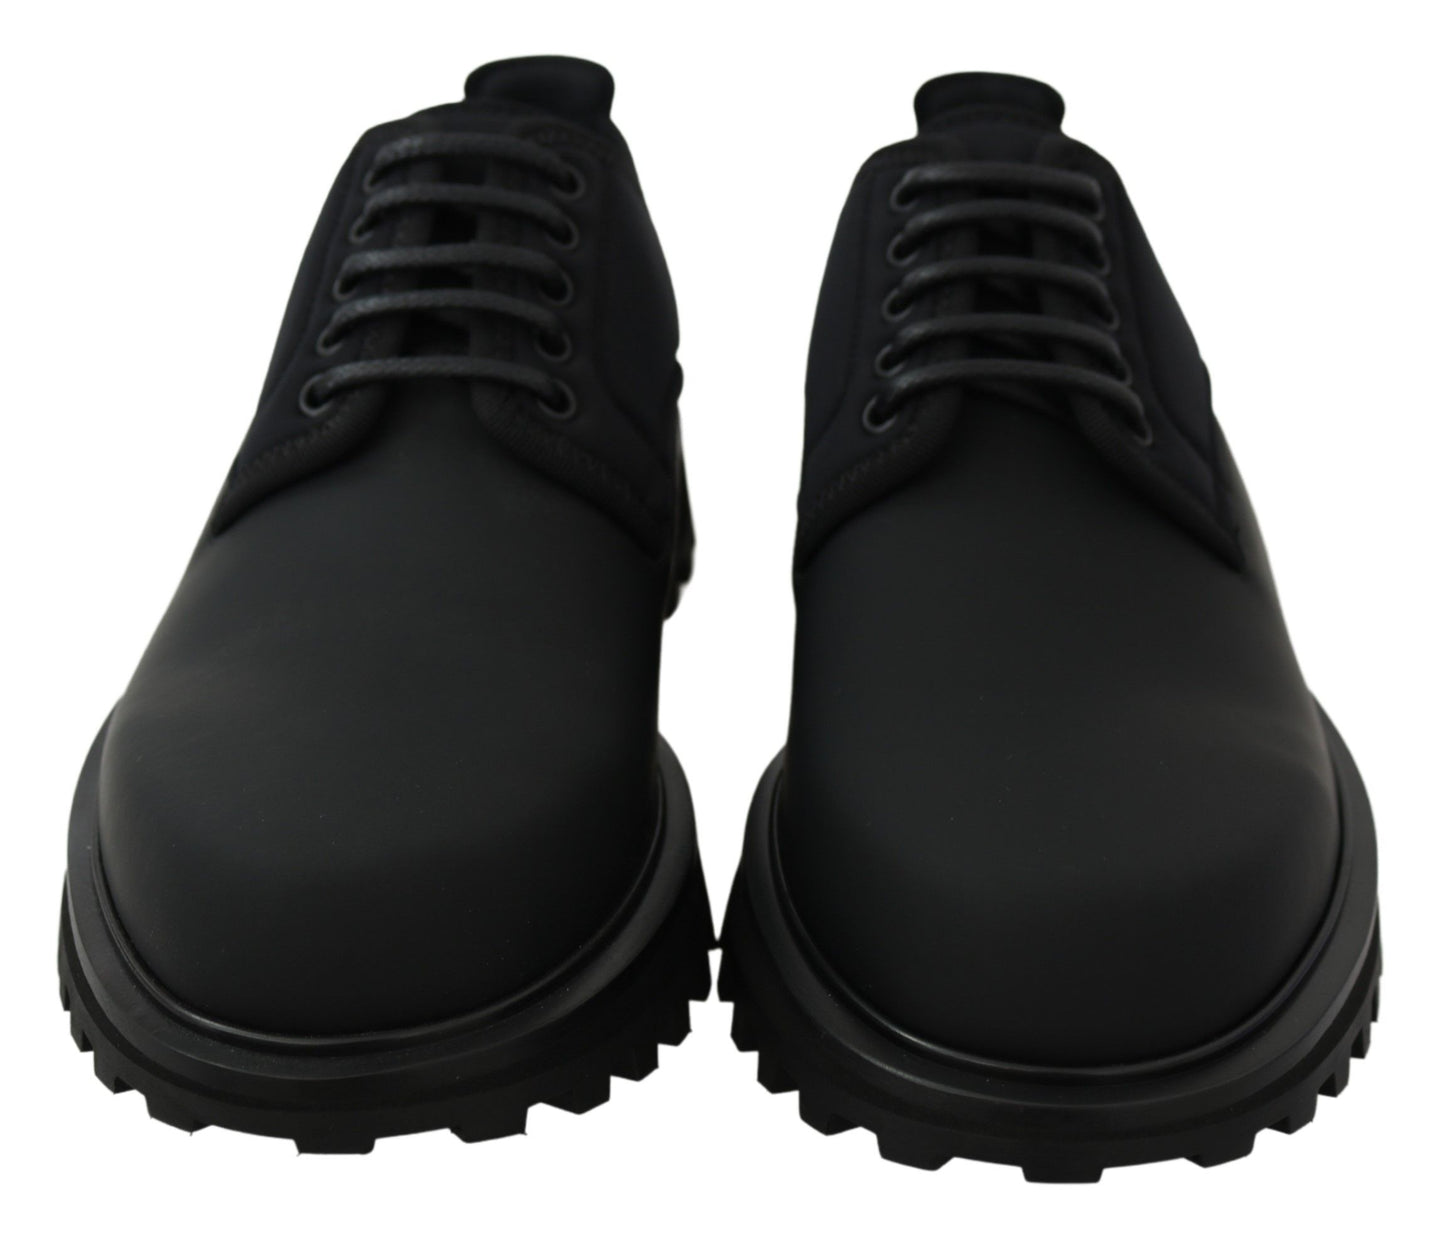 Black Rubberized Calfskin Chunky Derby Vulcano Shoes - Designed by Dolce & Gabbana Available to Buy at a Discounted Price on Moon Behind The Hill Online Designer Discount Store